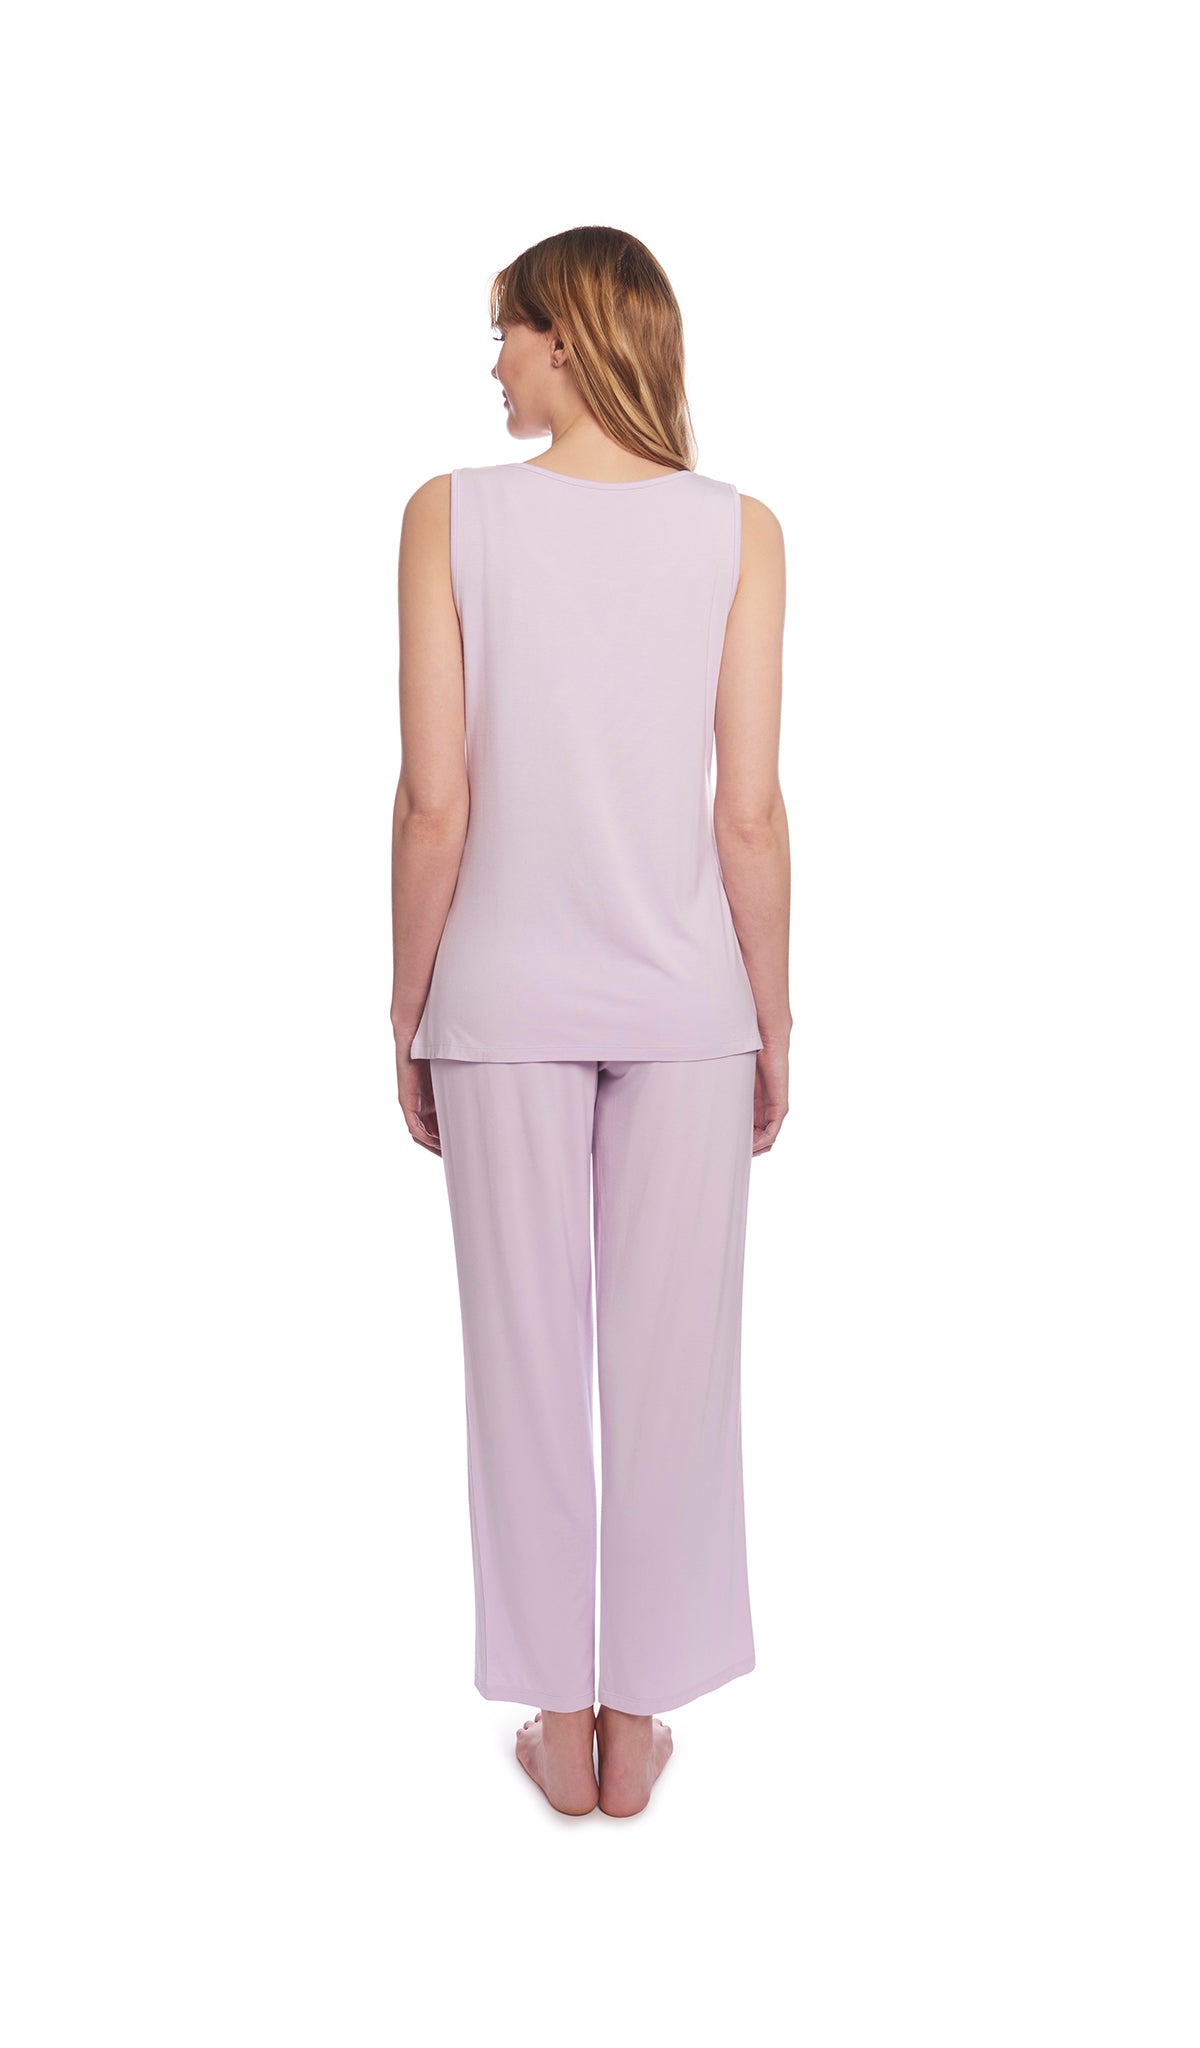 Lavender Analise 5-Piece Set, back shot of woman wearing tank top and pant.